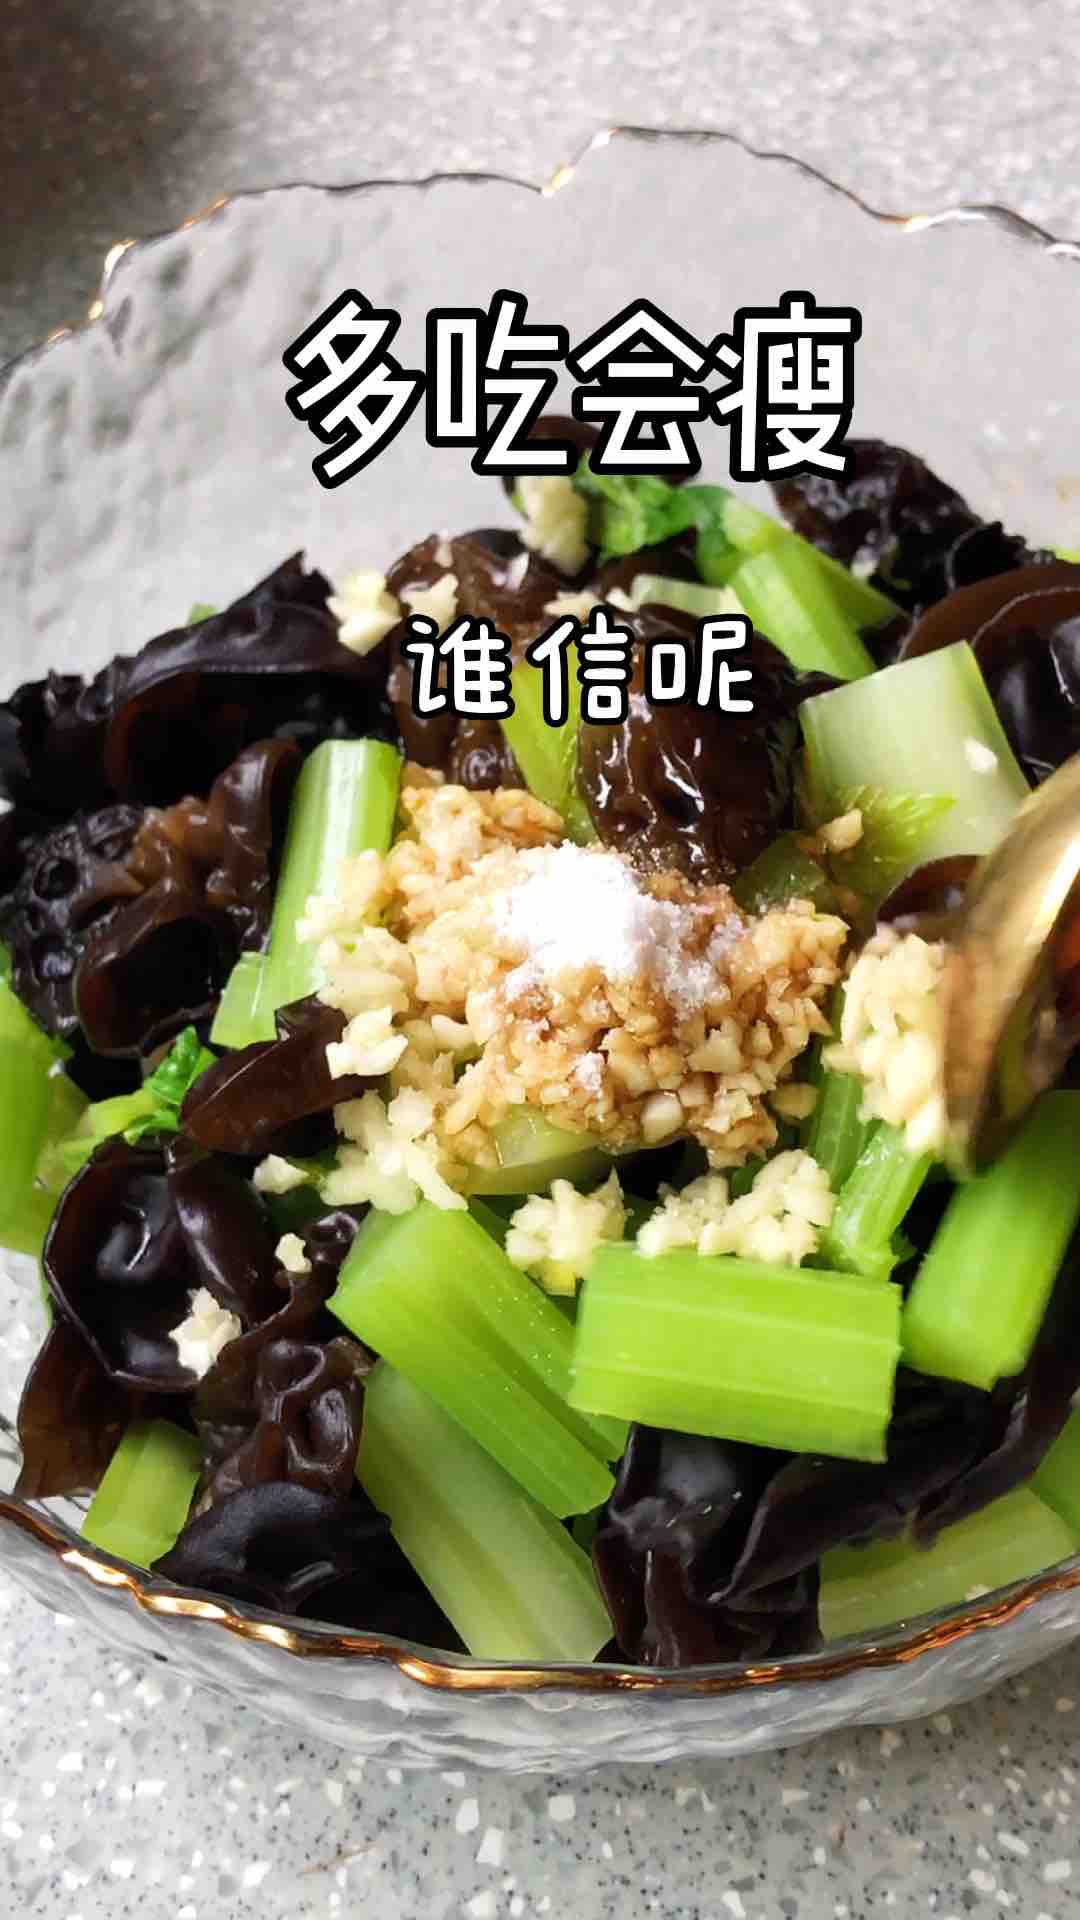 Celery Mixed with Black Fungus